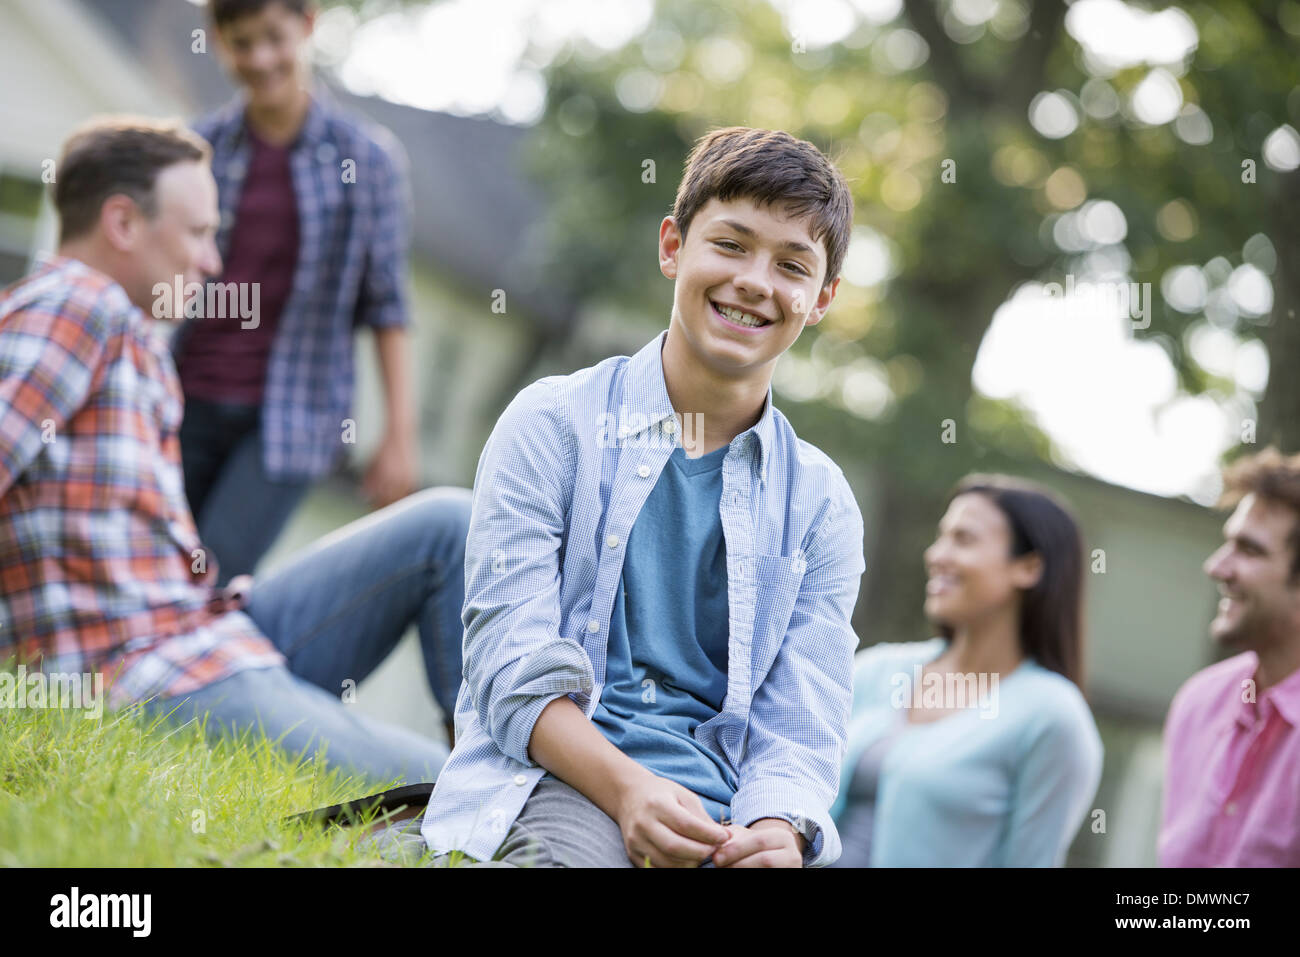 A boy sitting on  grass at a summer party. Stock Photo